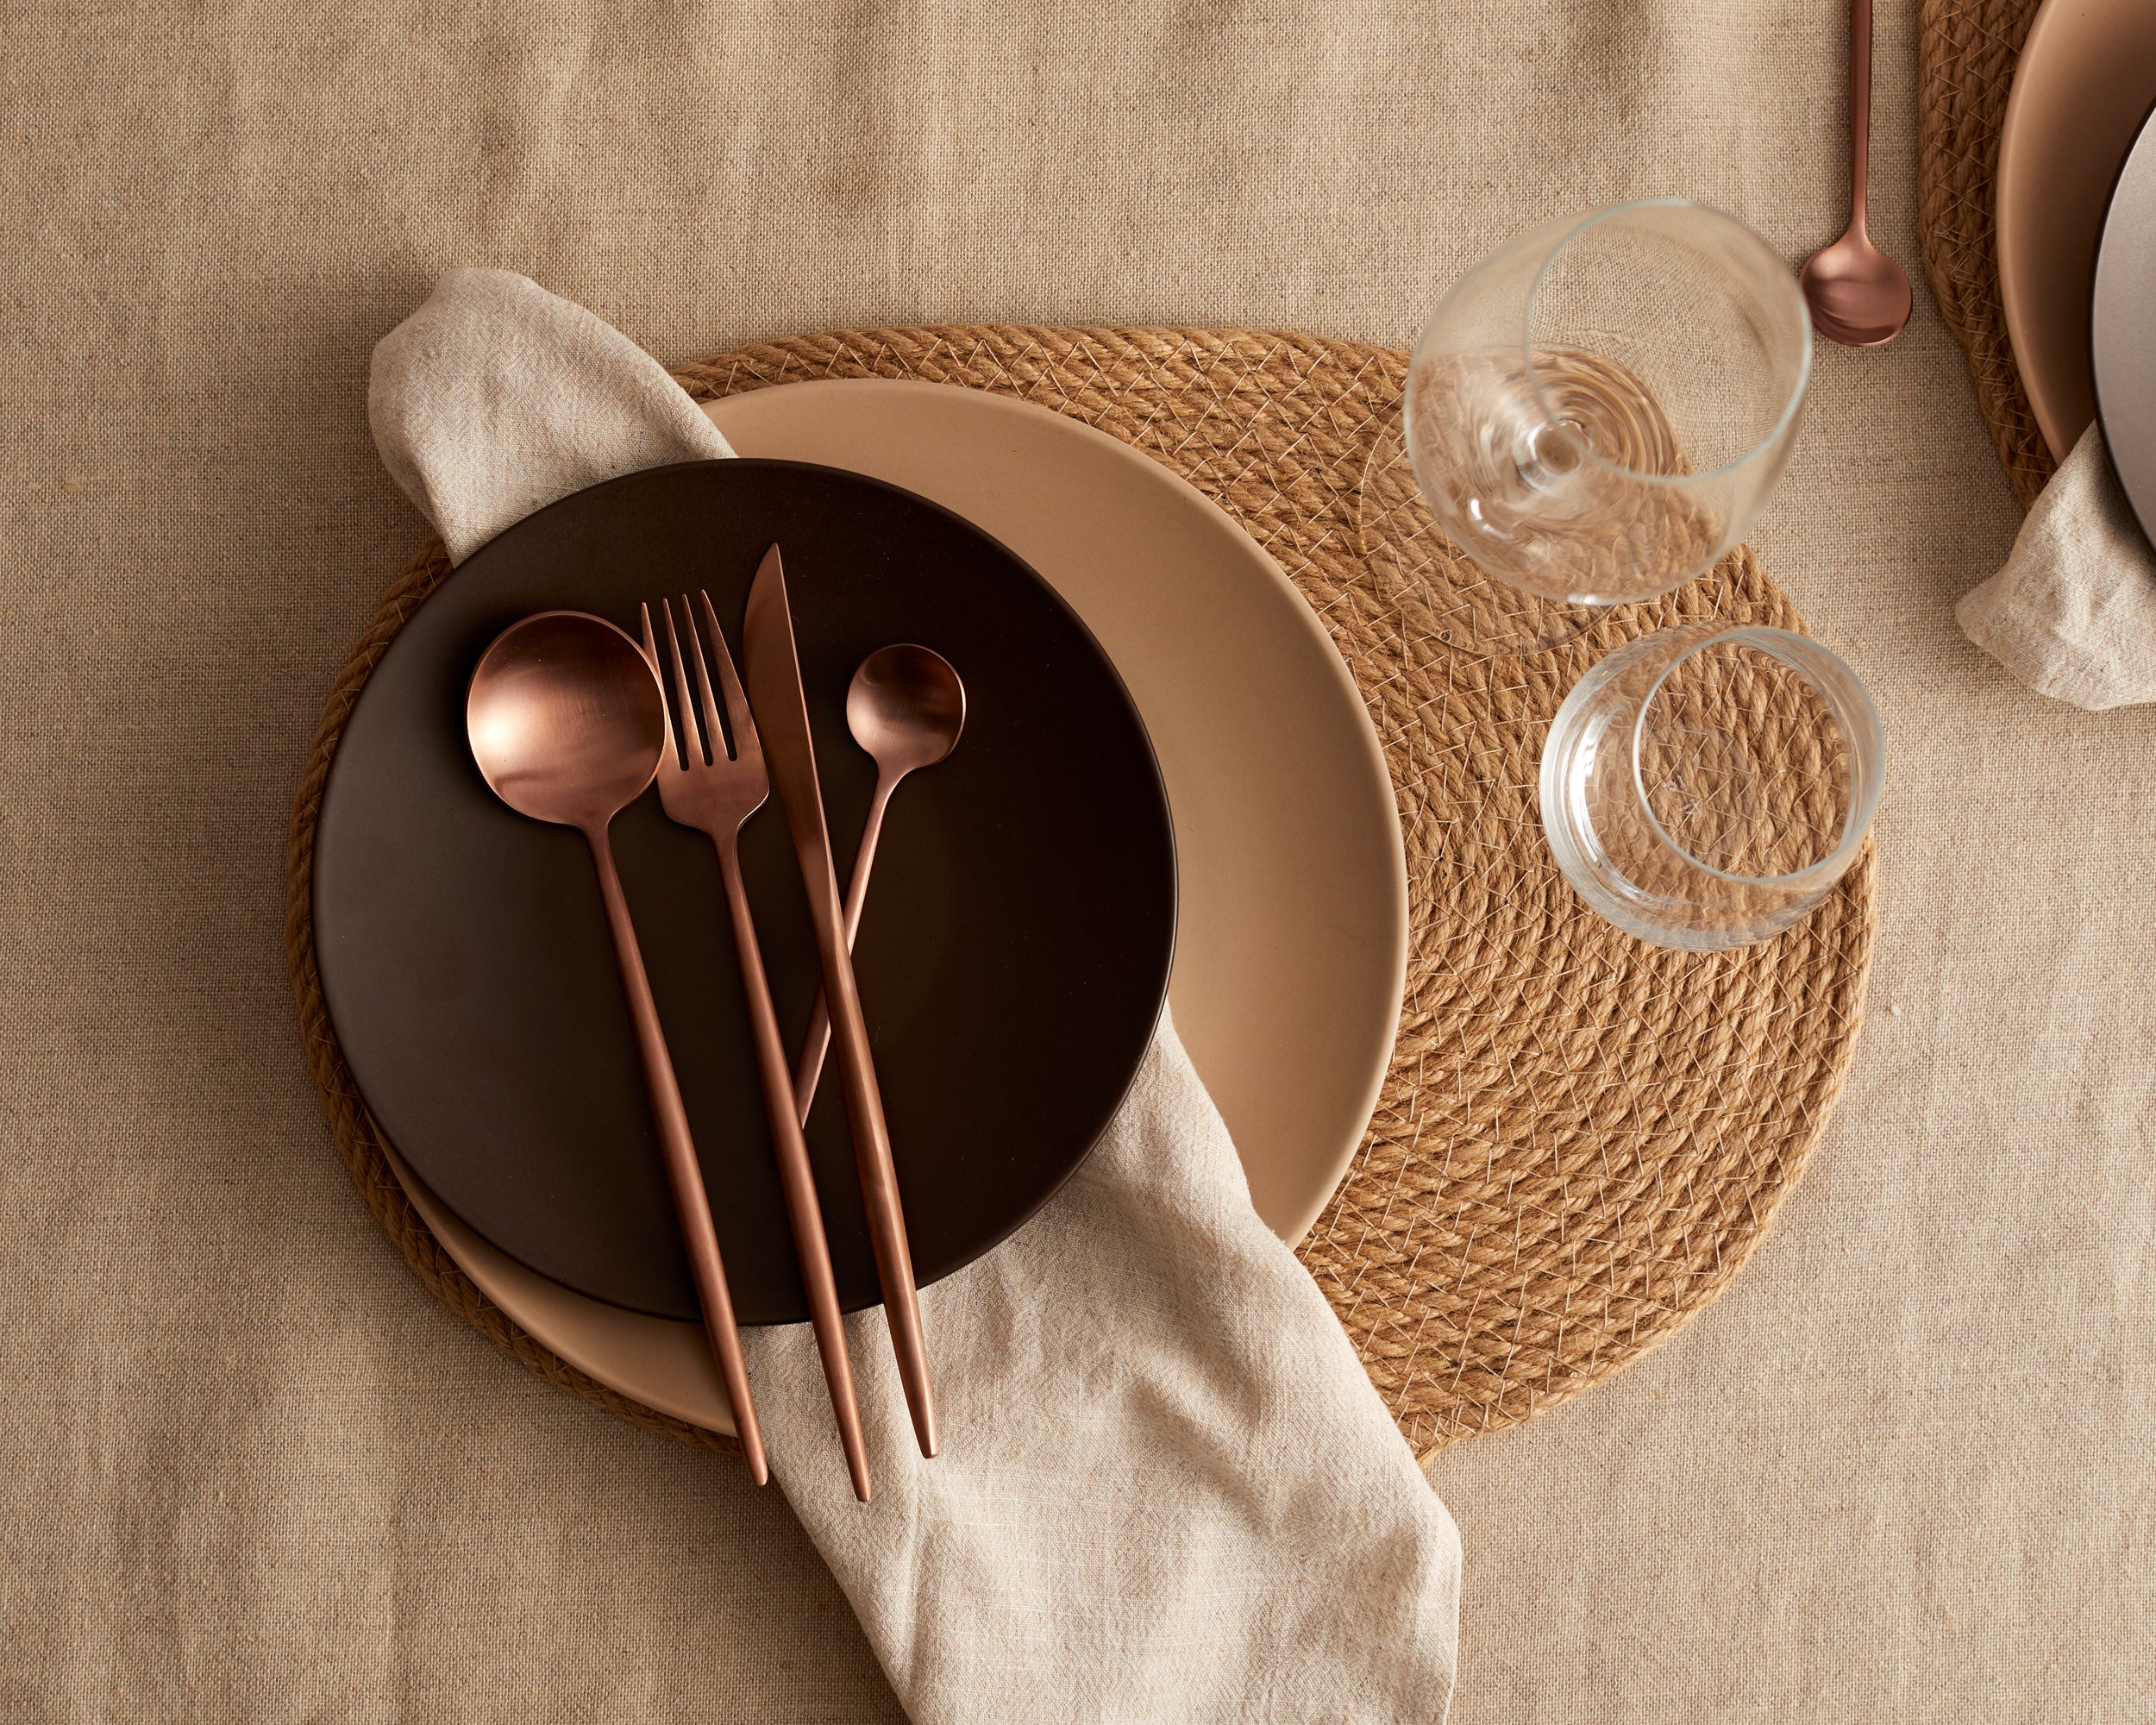 Jute Oval Placemat, round ceramic plates set, copper rose gold cutlery set in stainless steel and linen table napkins from What a Host Home